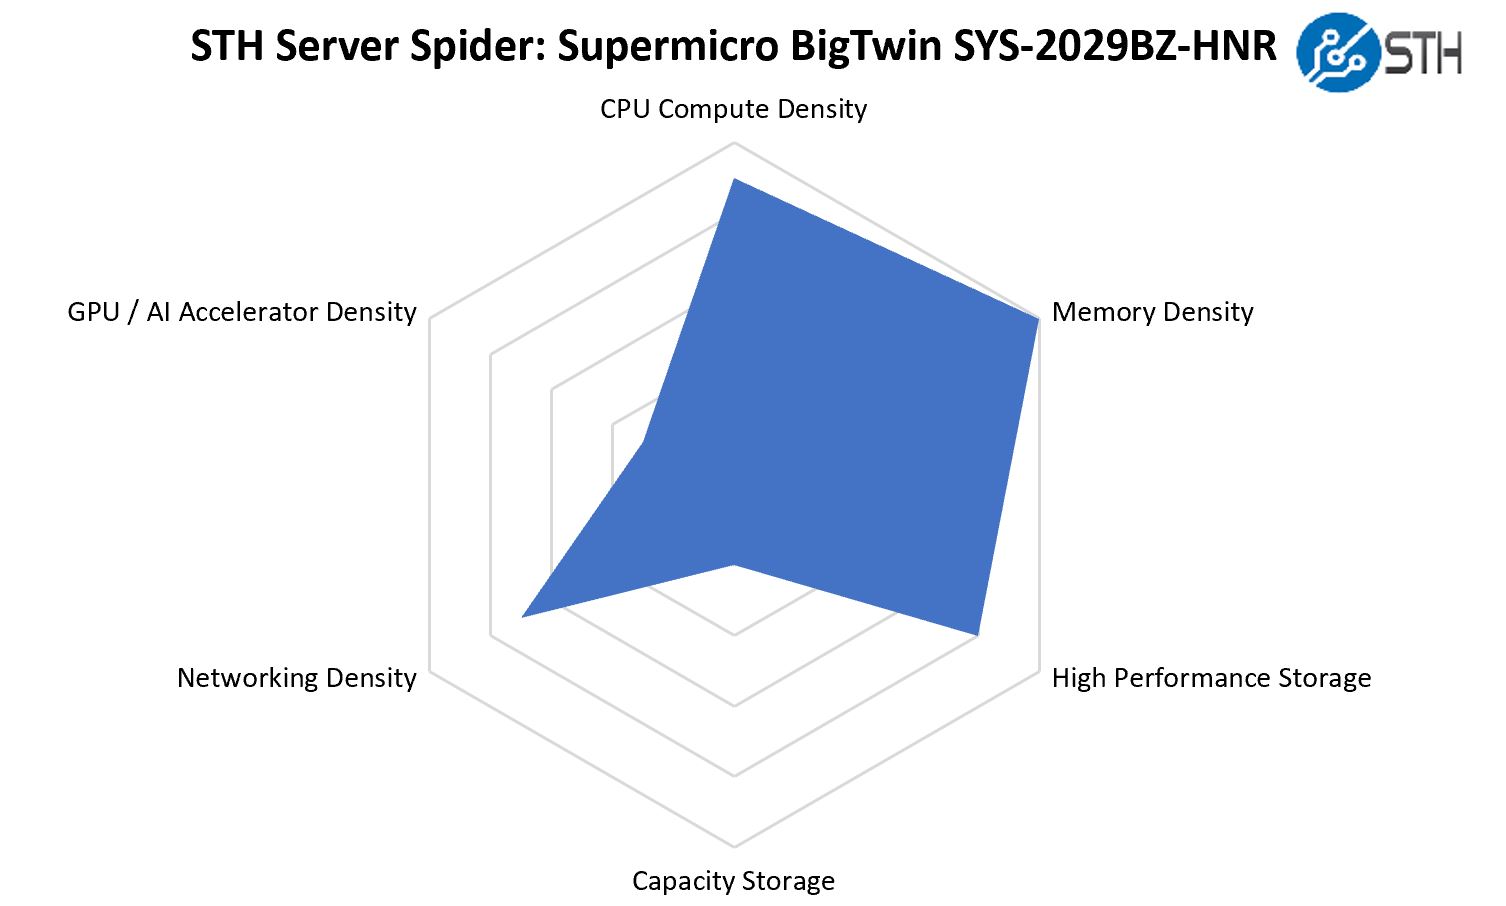 STH Server Spider Supermicro BigTwin SYS 2029BZ HNR